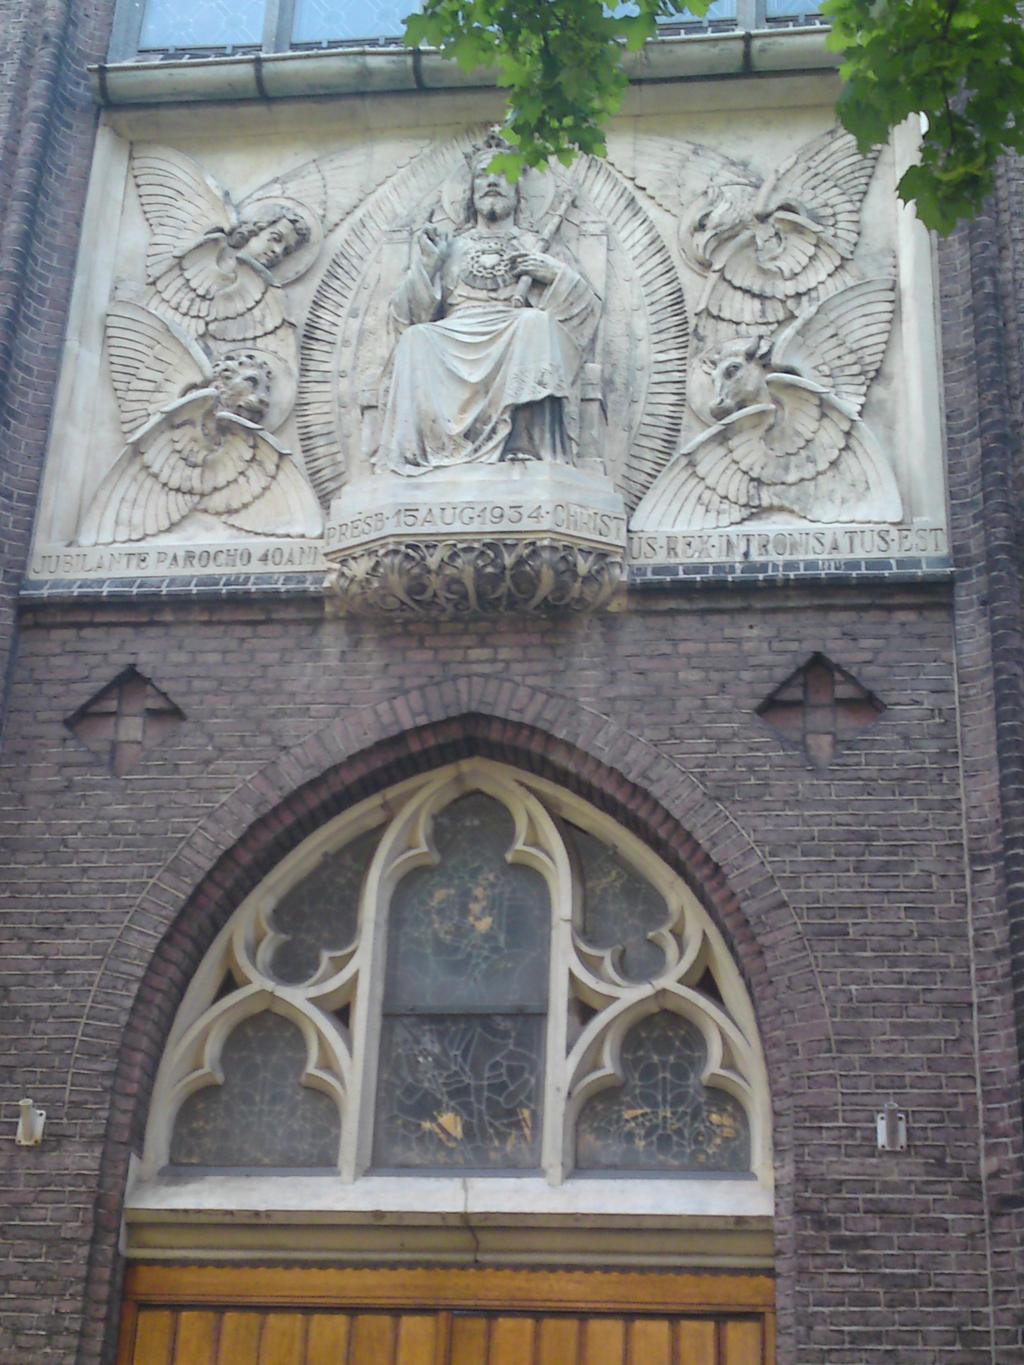 On the entrance there is a huge statue of Christ the saviour surrounded by Angels.